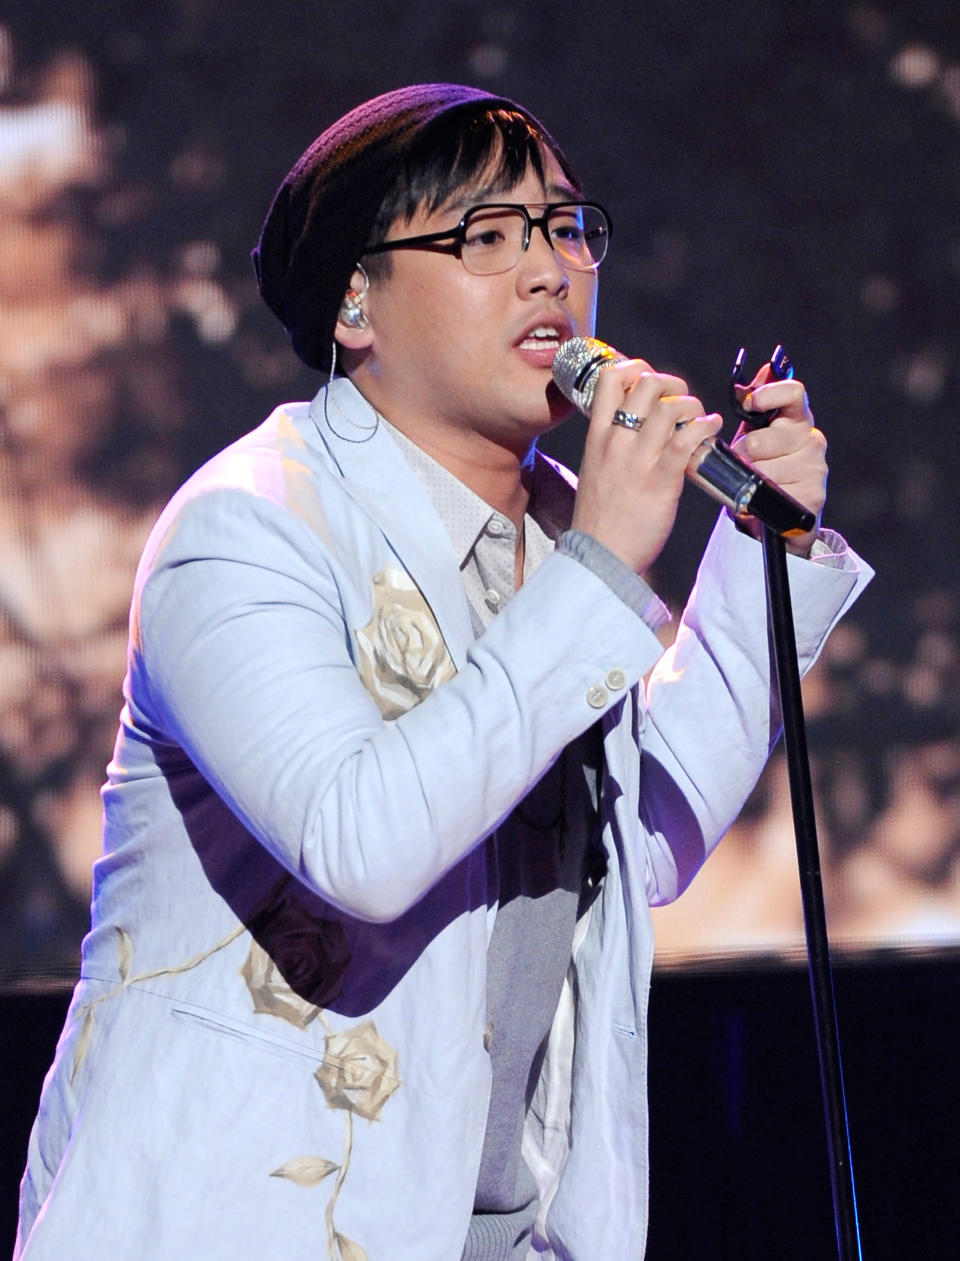 Heejun Han sings "A Song For You" by Donny Hathaway - After last week's performance didn't get positive comments, Heejun Han reclaimed the judges trust. "People don't realize you don't make it this far by mistake. You're here because we realize you can sing this way," said Jennifer Lopez.